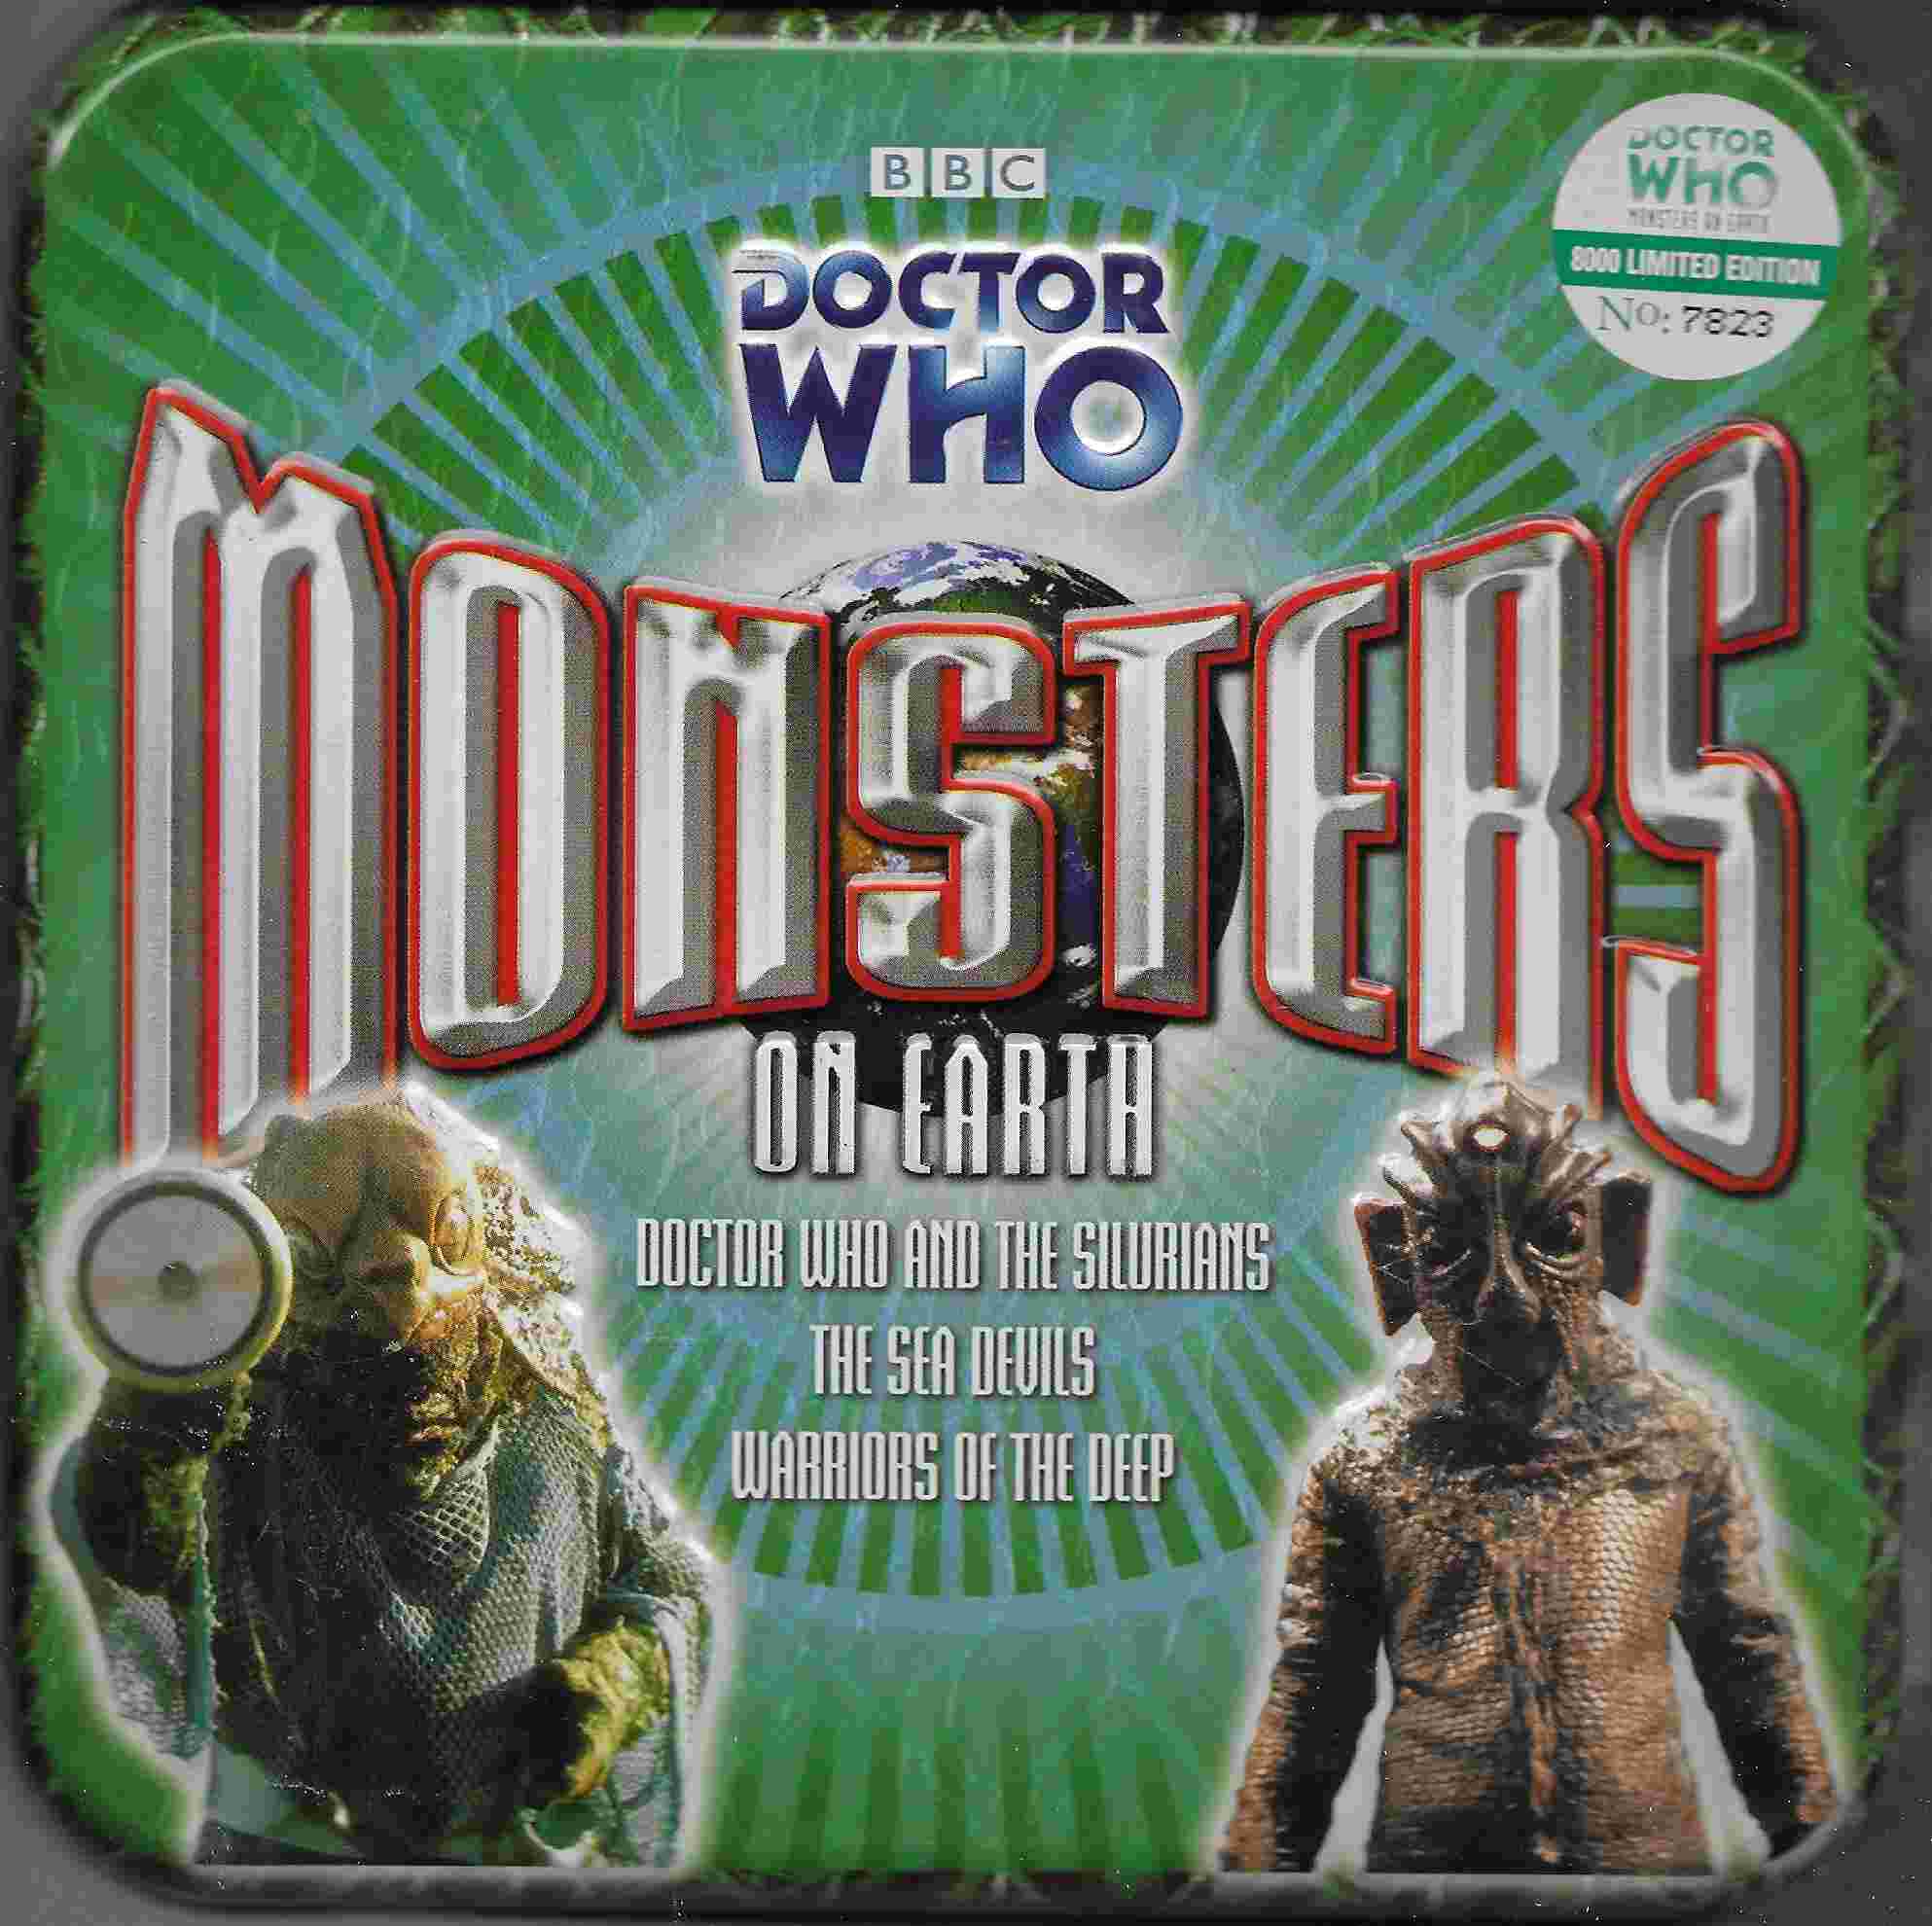 Picture of ISBN 1-846-07102-X Doctor Who - Monsters on Earth by artist Malcolm Hulke / Johnny Byrne from the BBC records and Tapes library